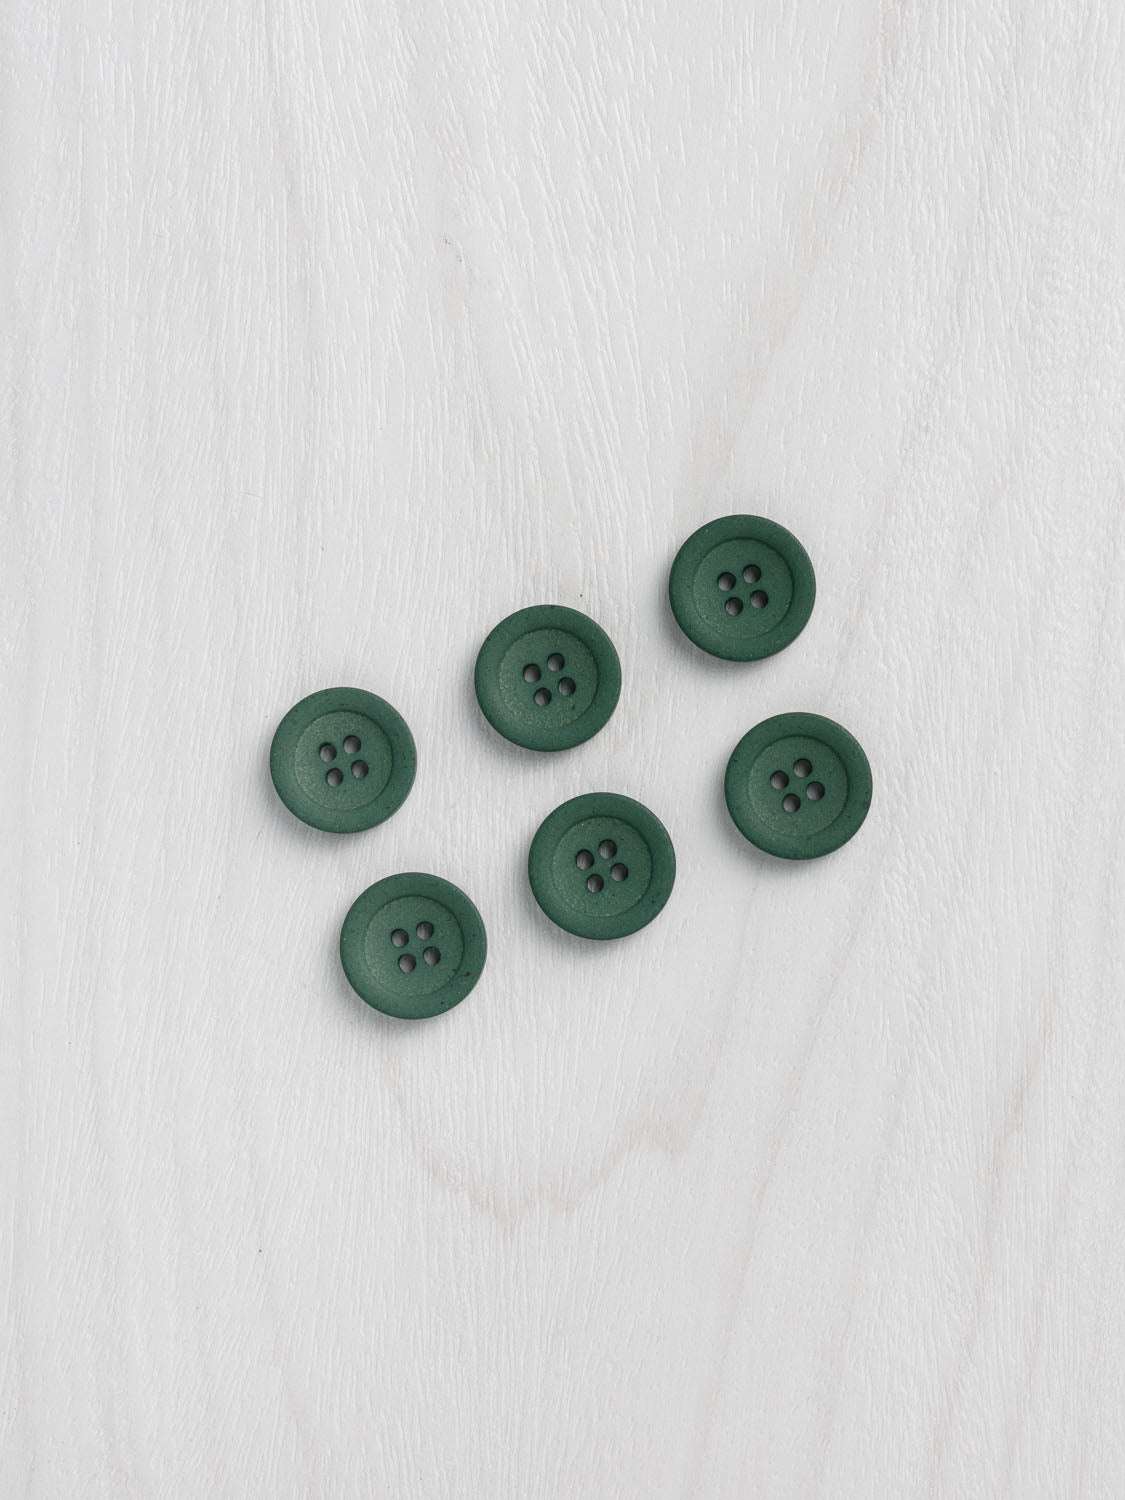 8') Buttons - 6 pack | Core Fabrics